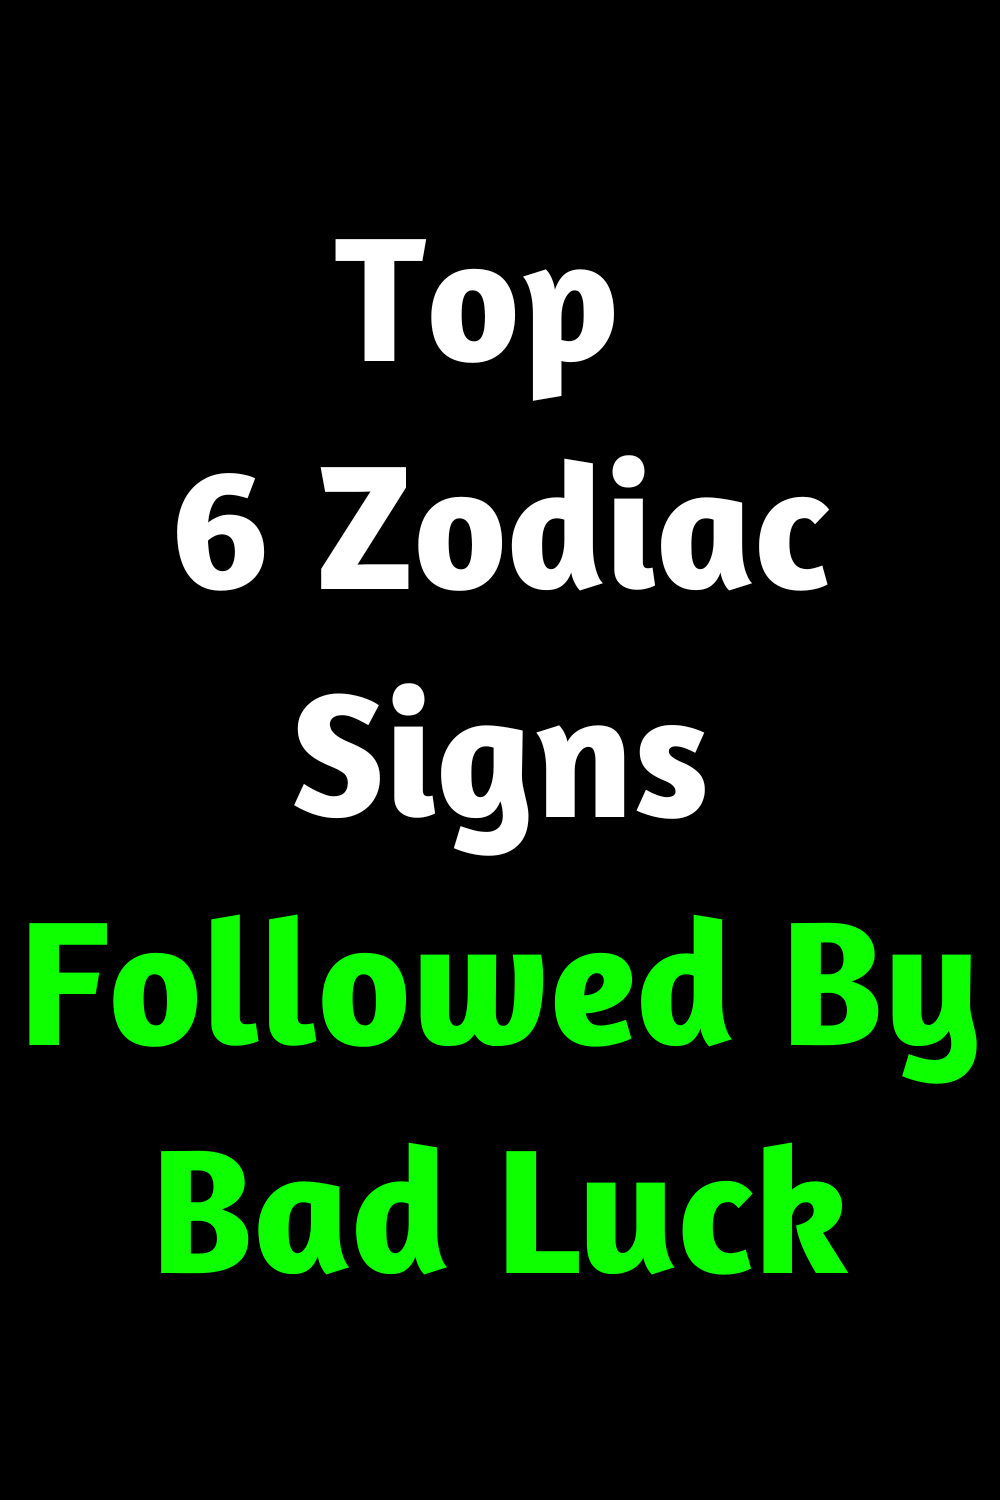 Top 6 Zodiac Signs Followed By Bad Luck